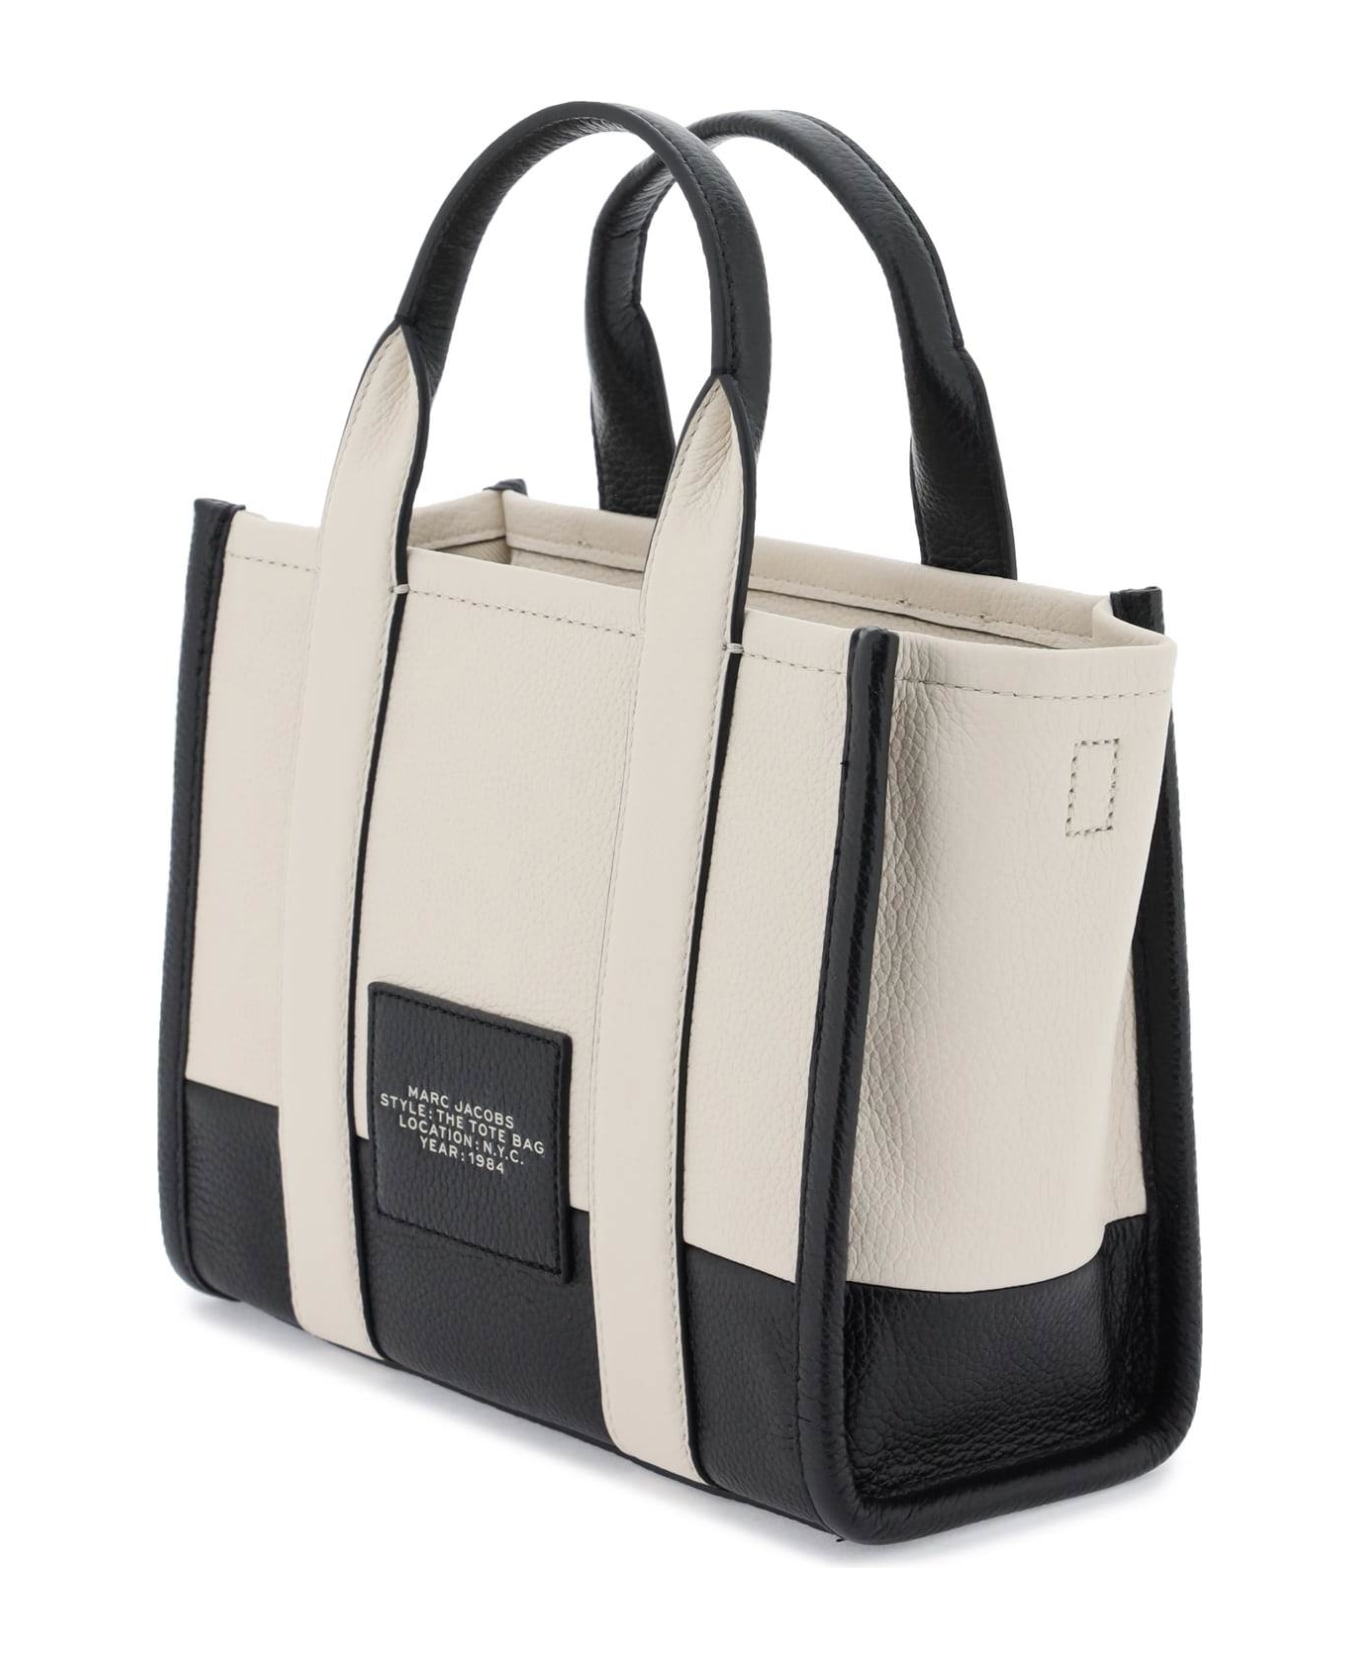 Marc Jacobs The Small Tote Bag - Cream トートバッグ